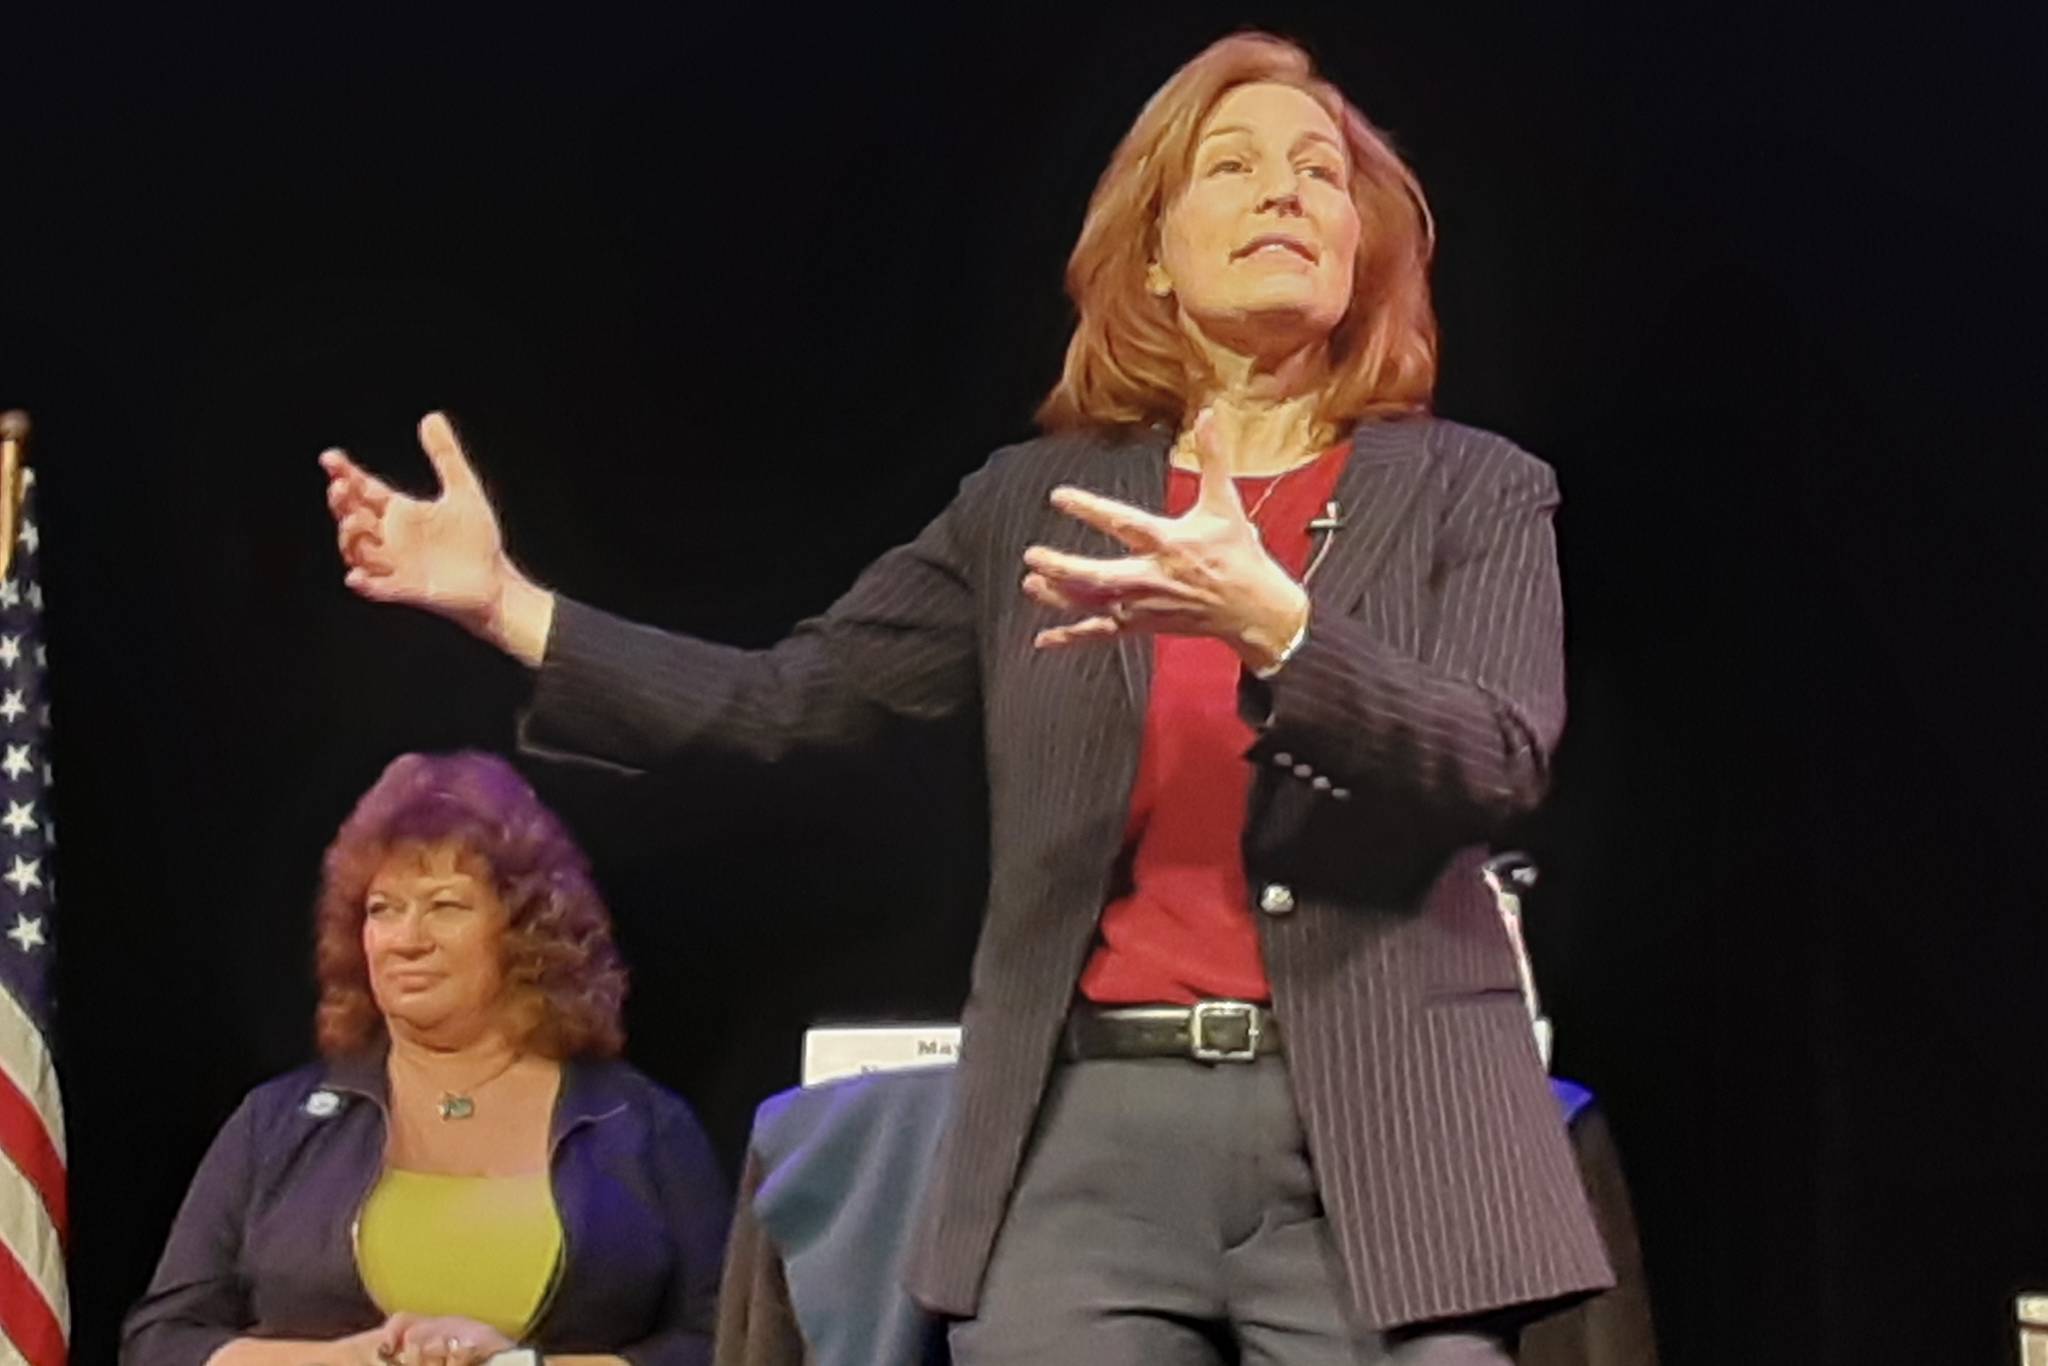 U.S. 8th Congressional District Rep. Kim Schrier, D-Issaquah, addresses a town hall at Auburn Avenue Theater last Sunday afternoon. ROBERT WHALE, Auburn Reporter